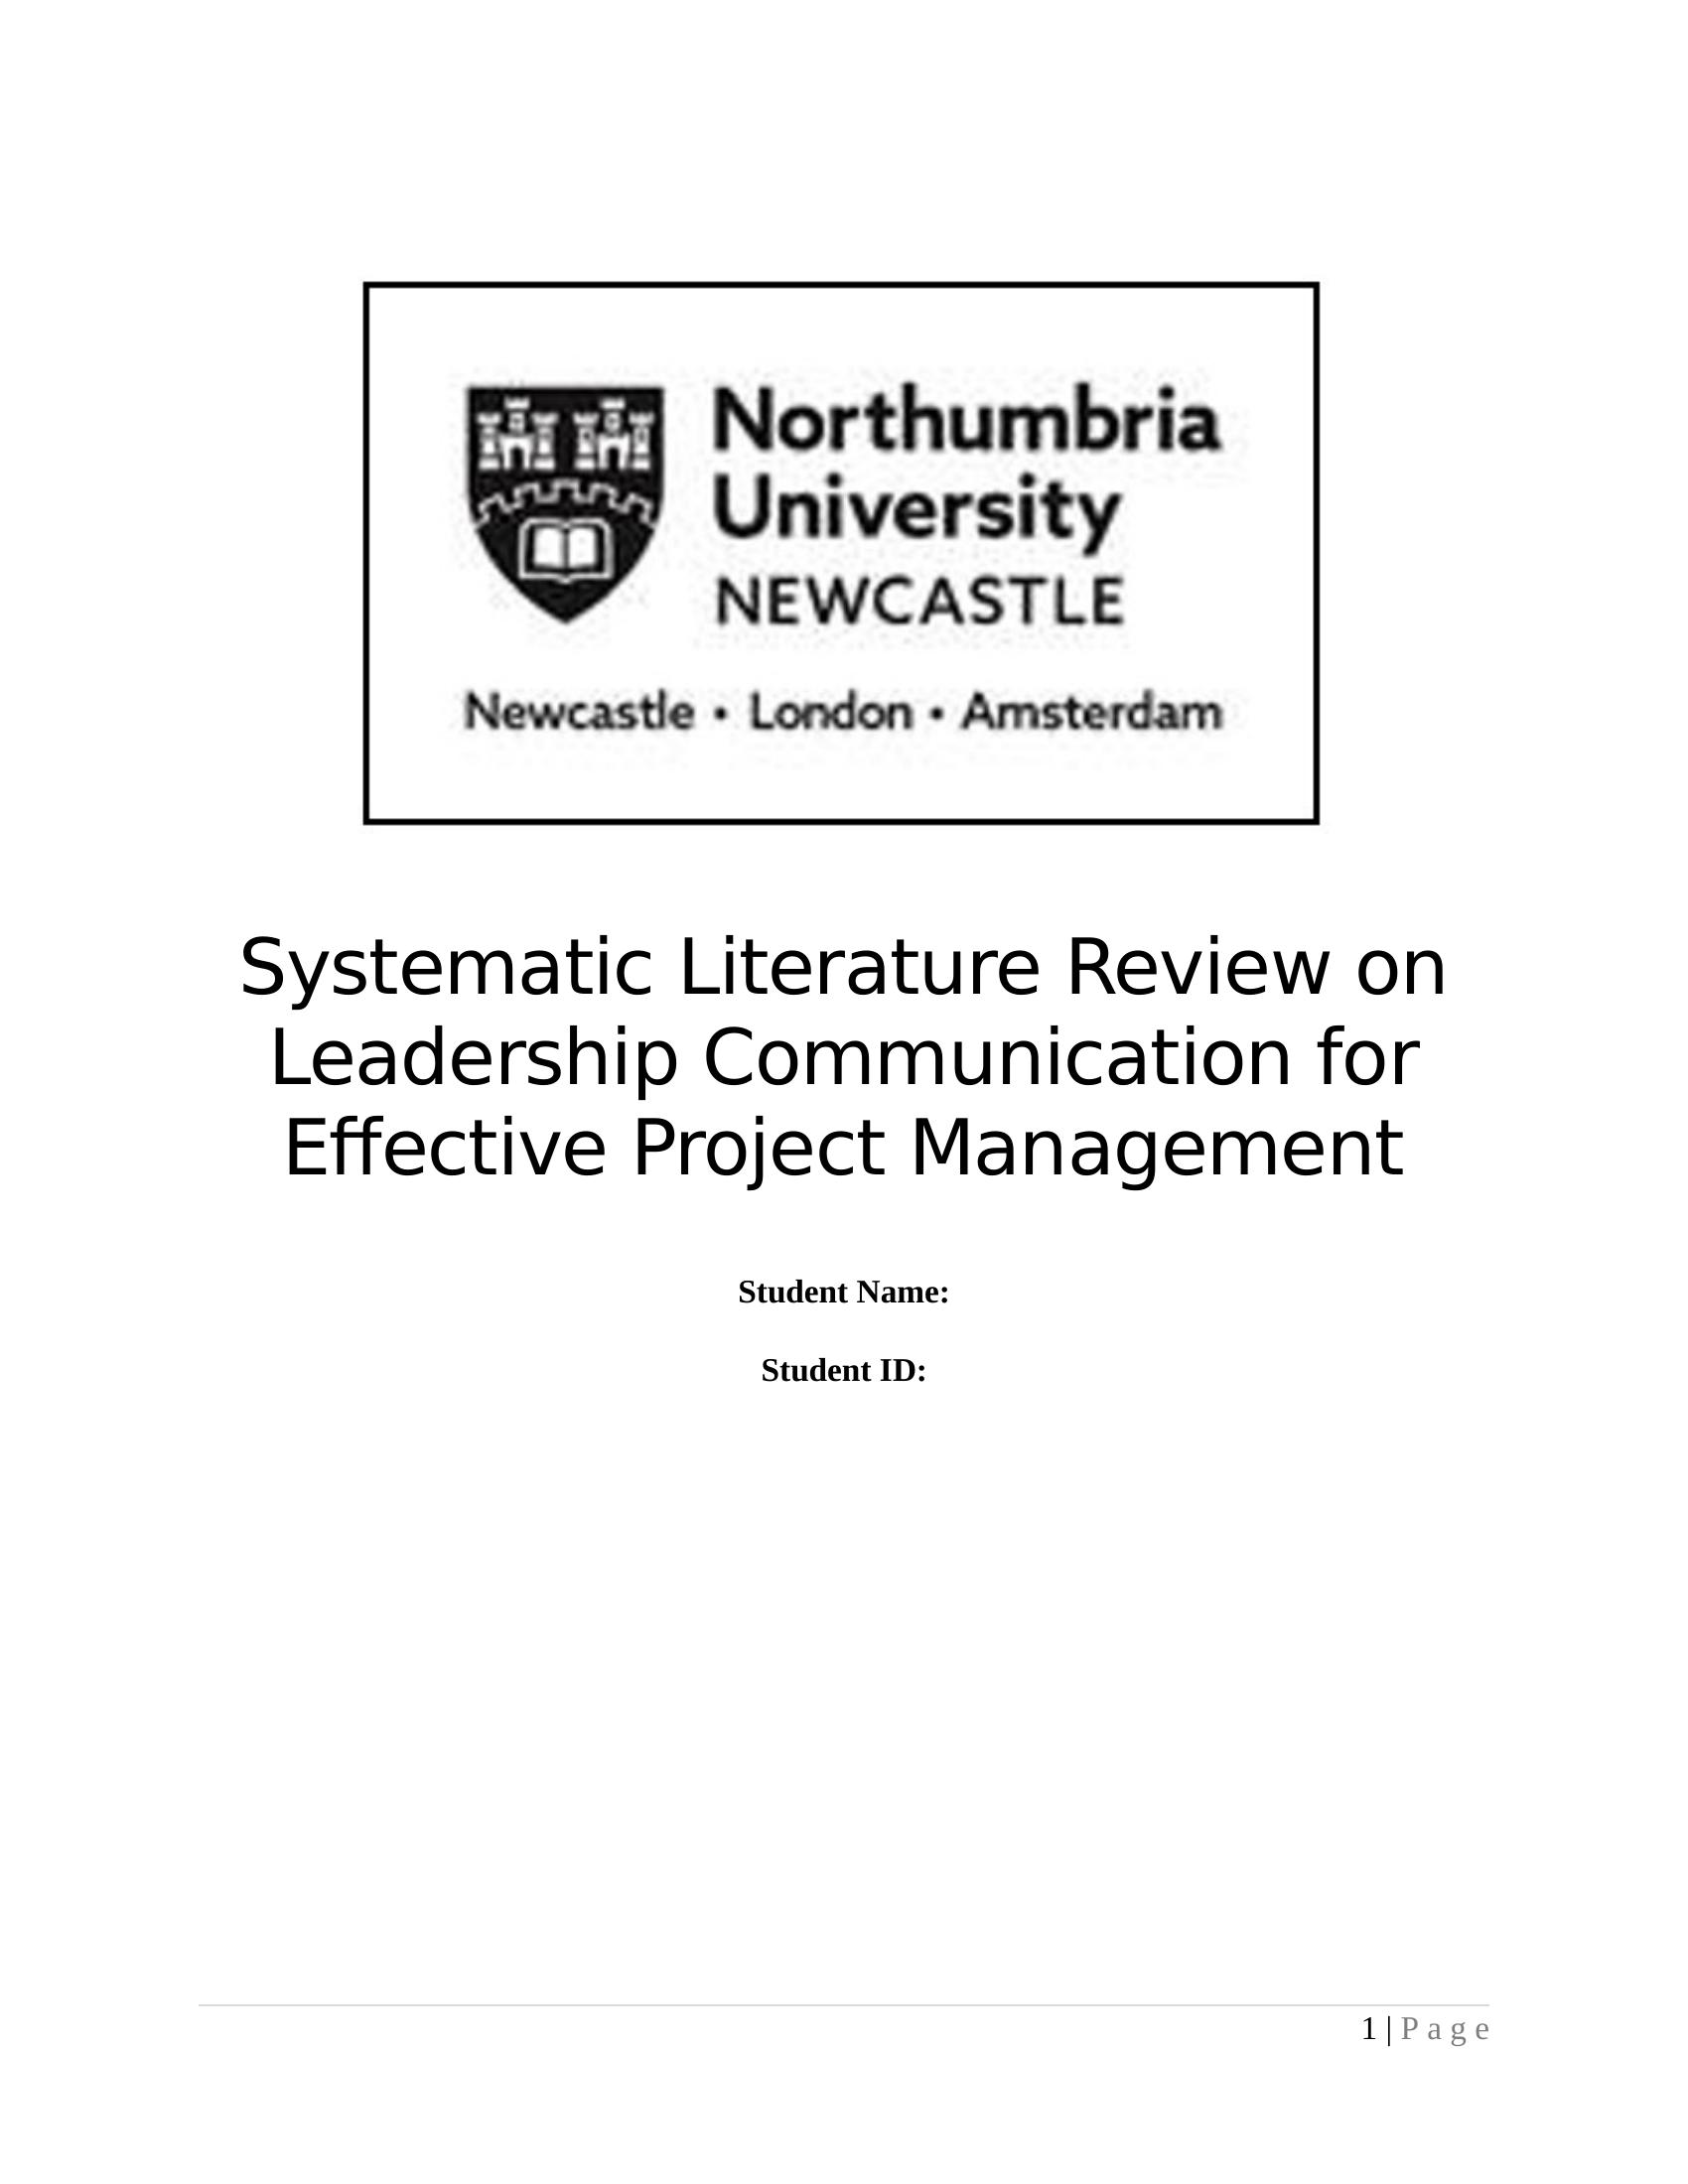 Systematic Literature Review on Leadership Communication for Effective Project Management